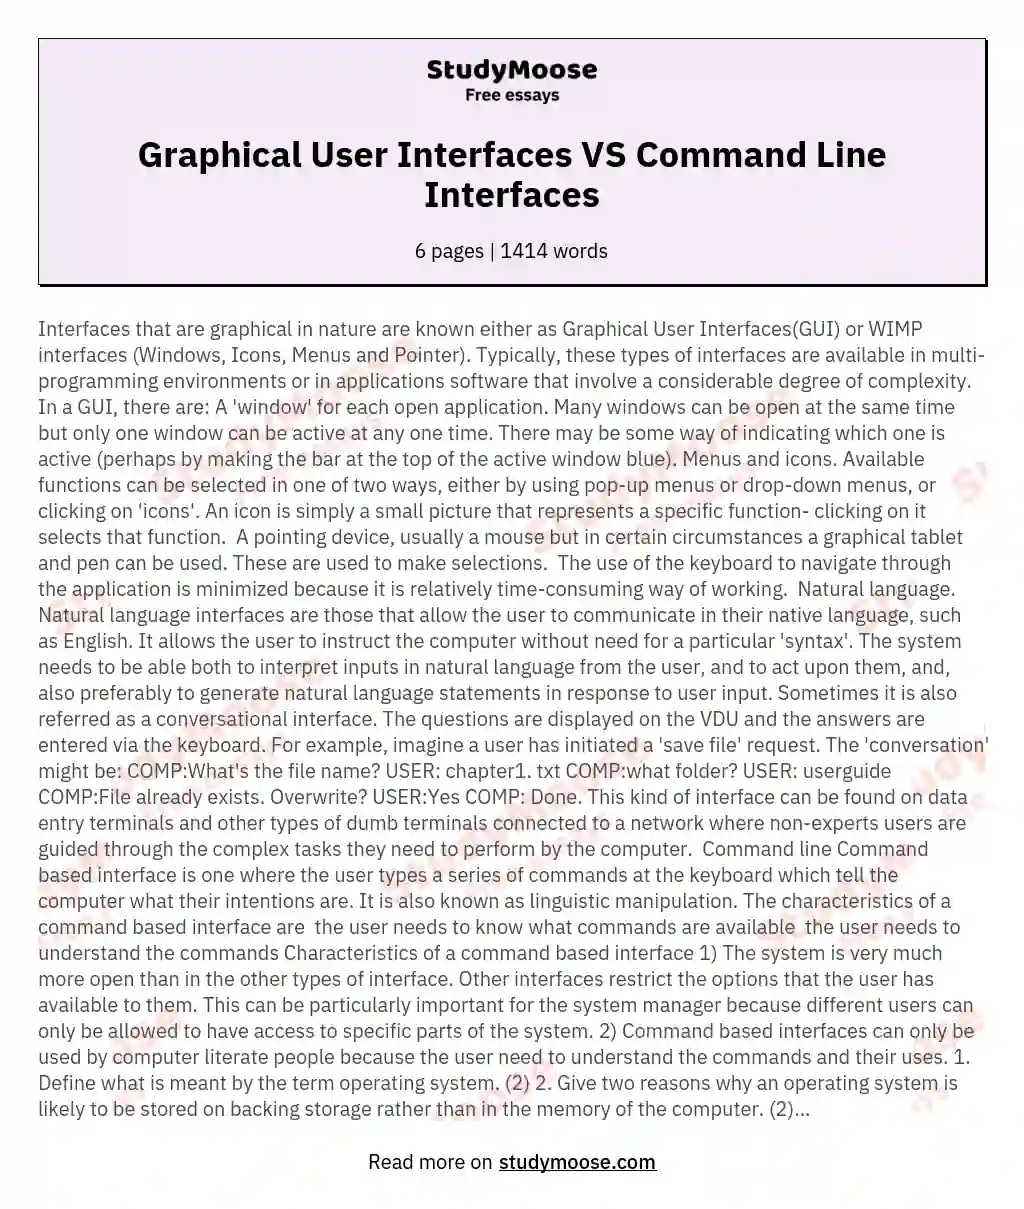 Graphical User Interfaces VS Command Line Interfaces essay